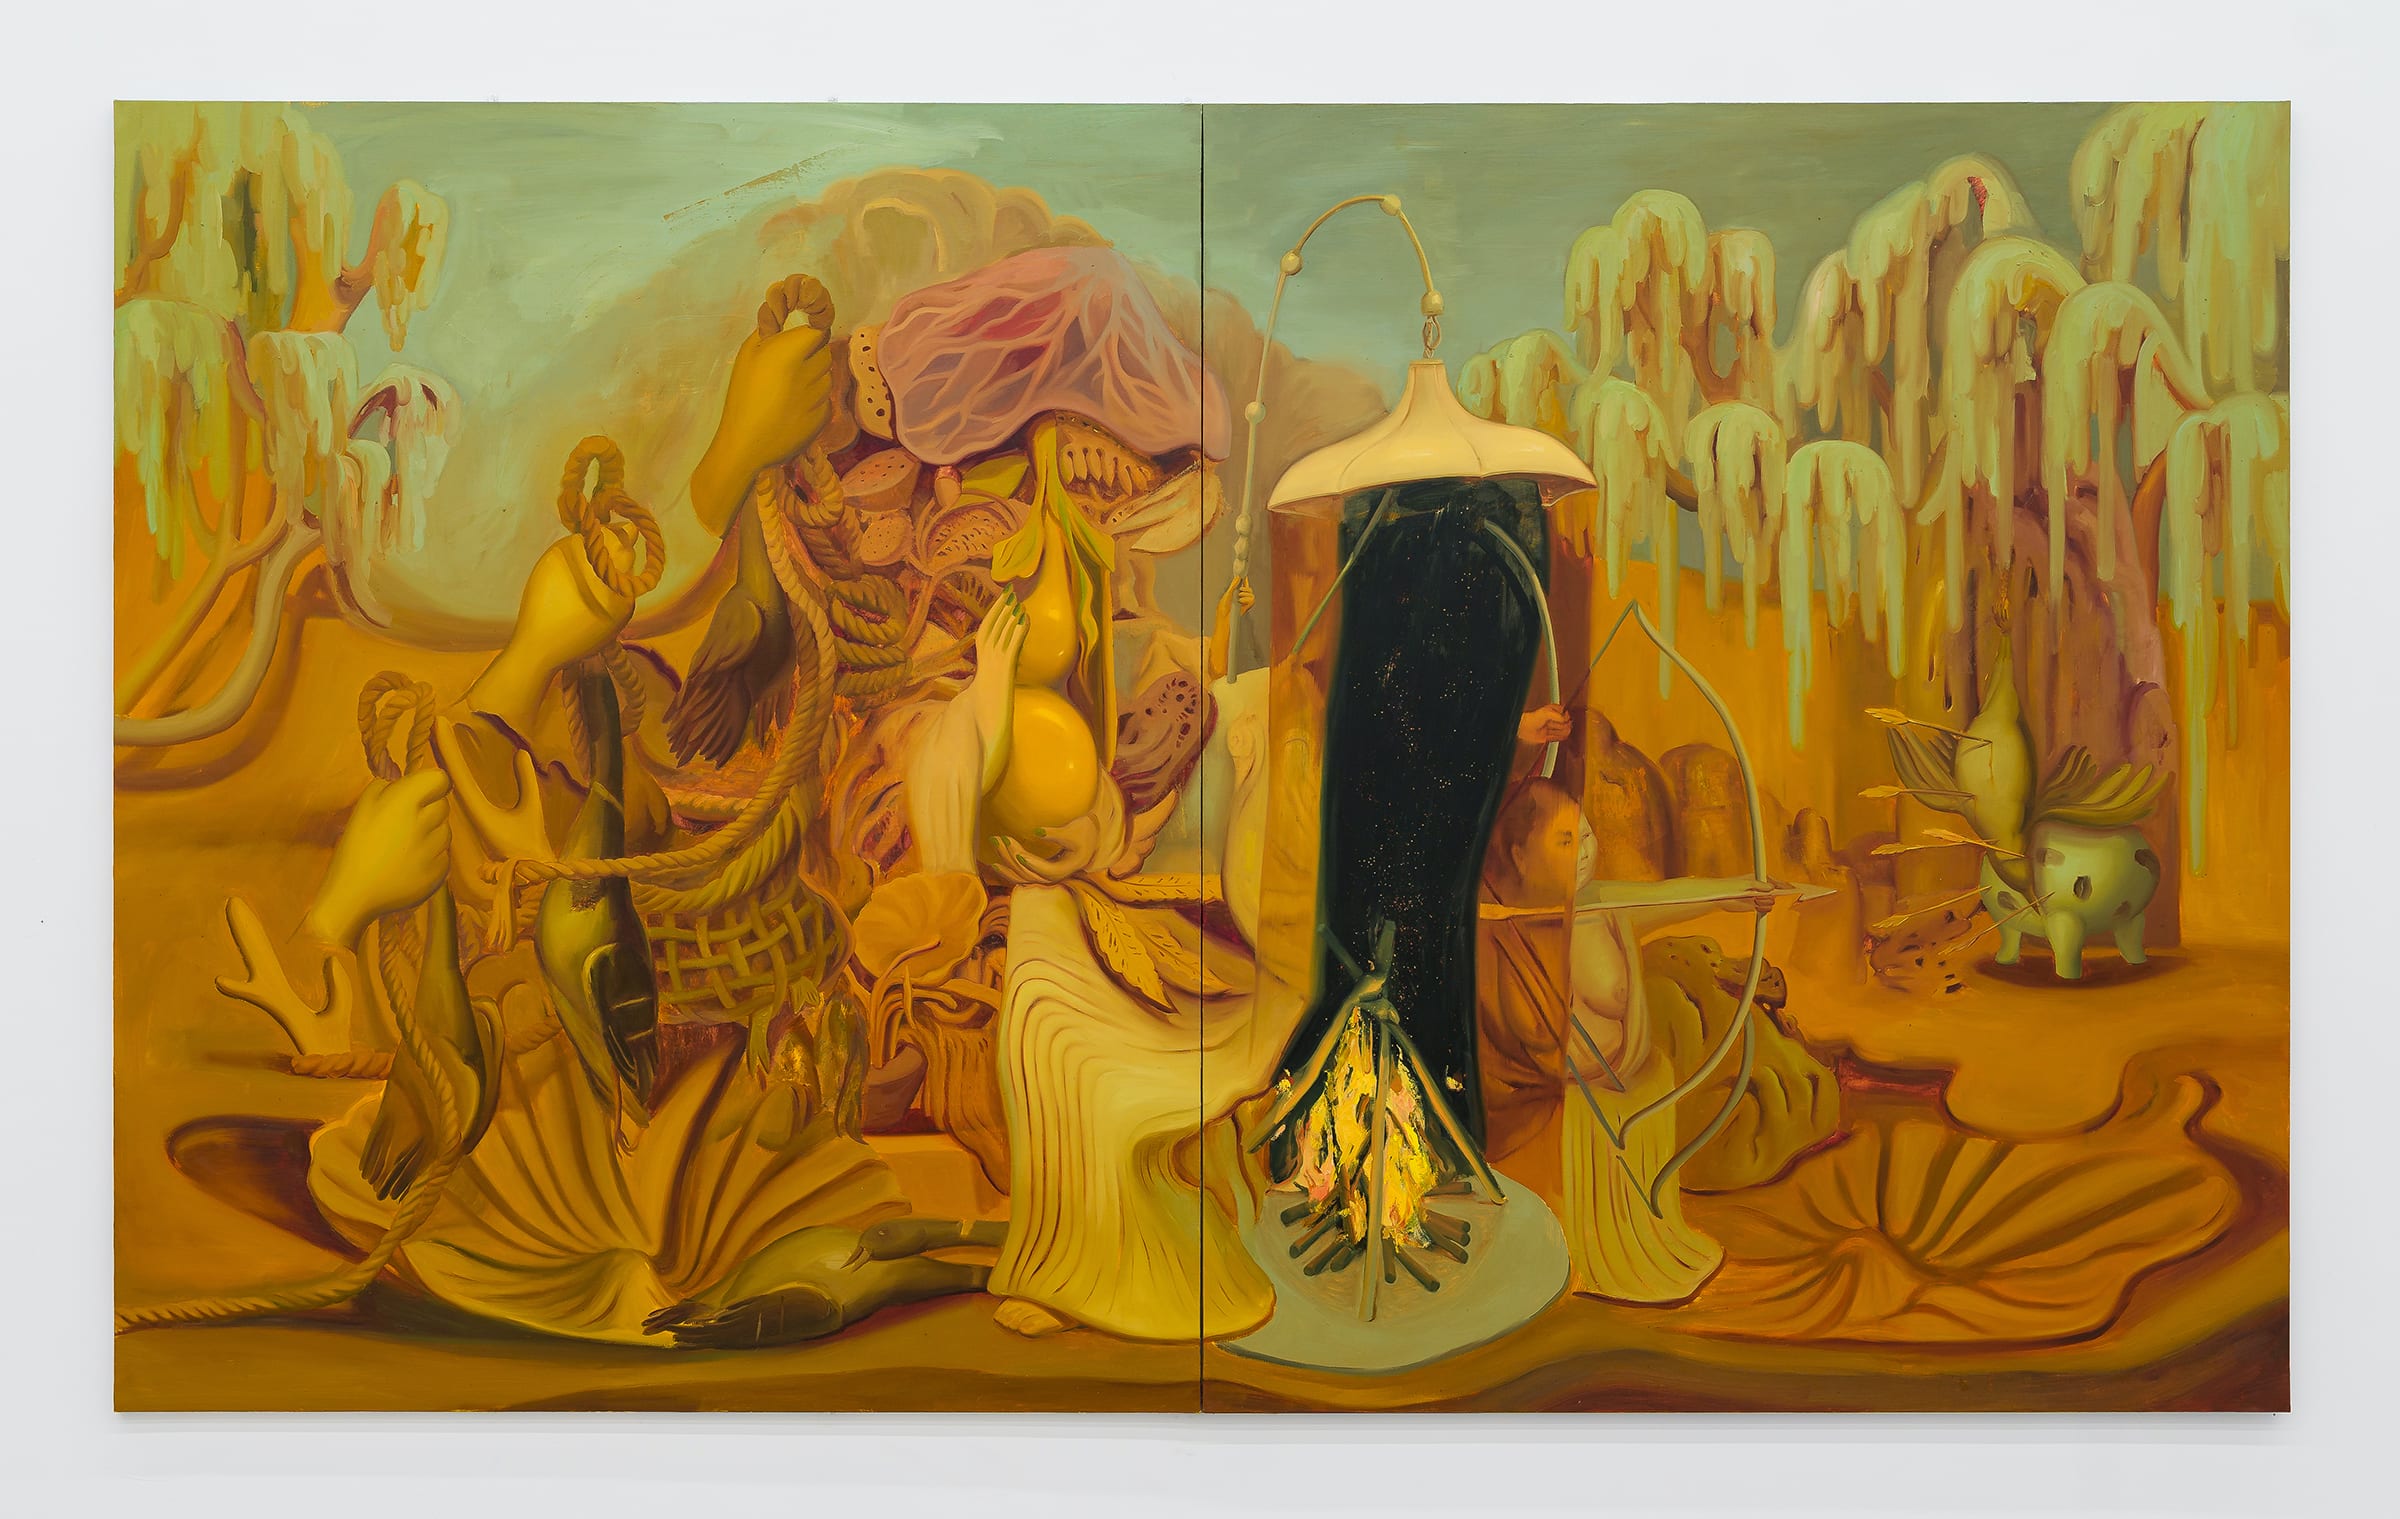 Dominique Fung, The Control of Fire, 2021. Courtesy of the artist and Nicodim Gallery, New York, Los Angeles, and Bucharest.